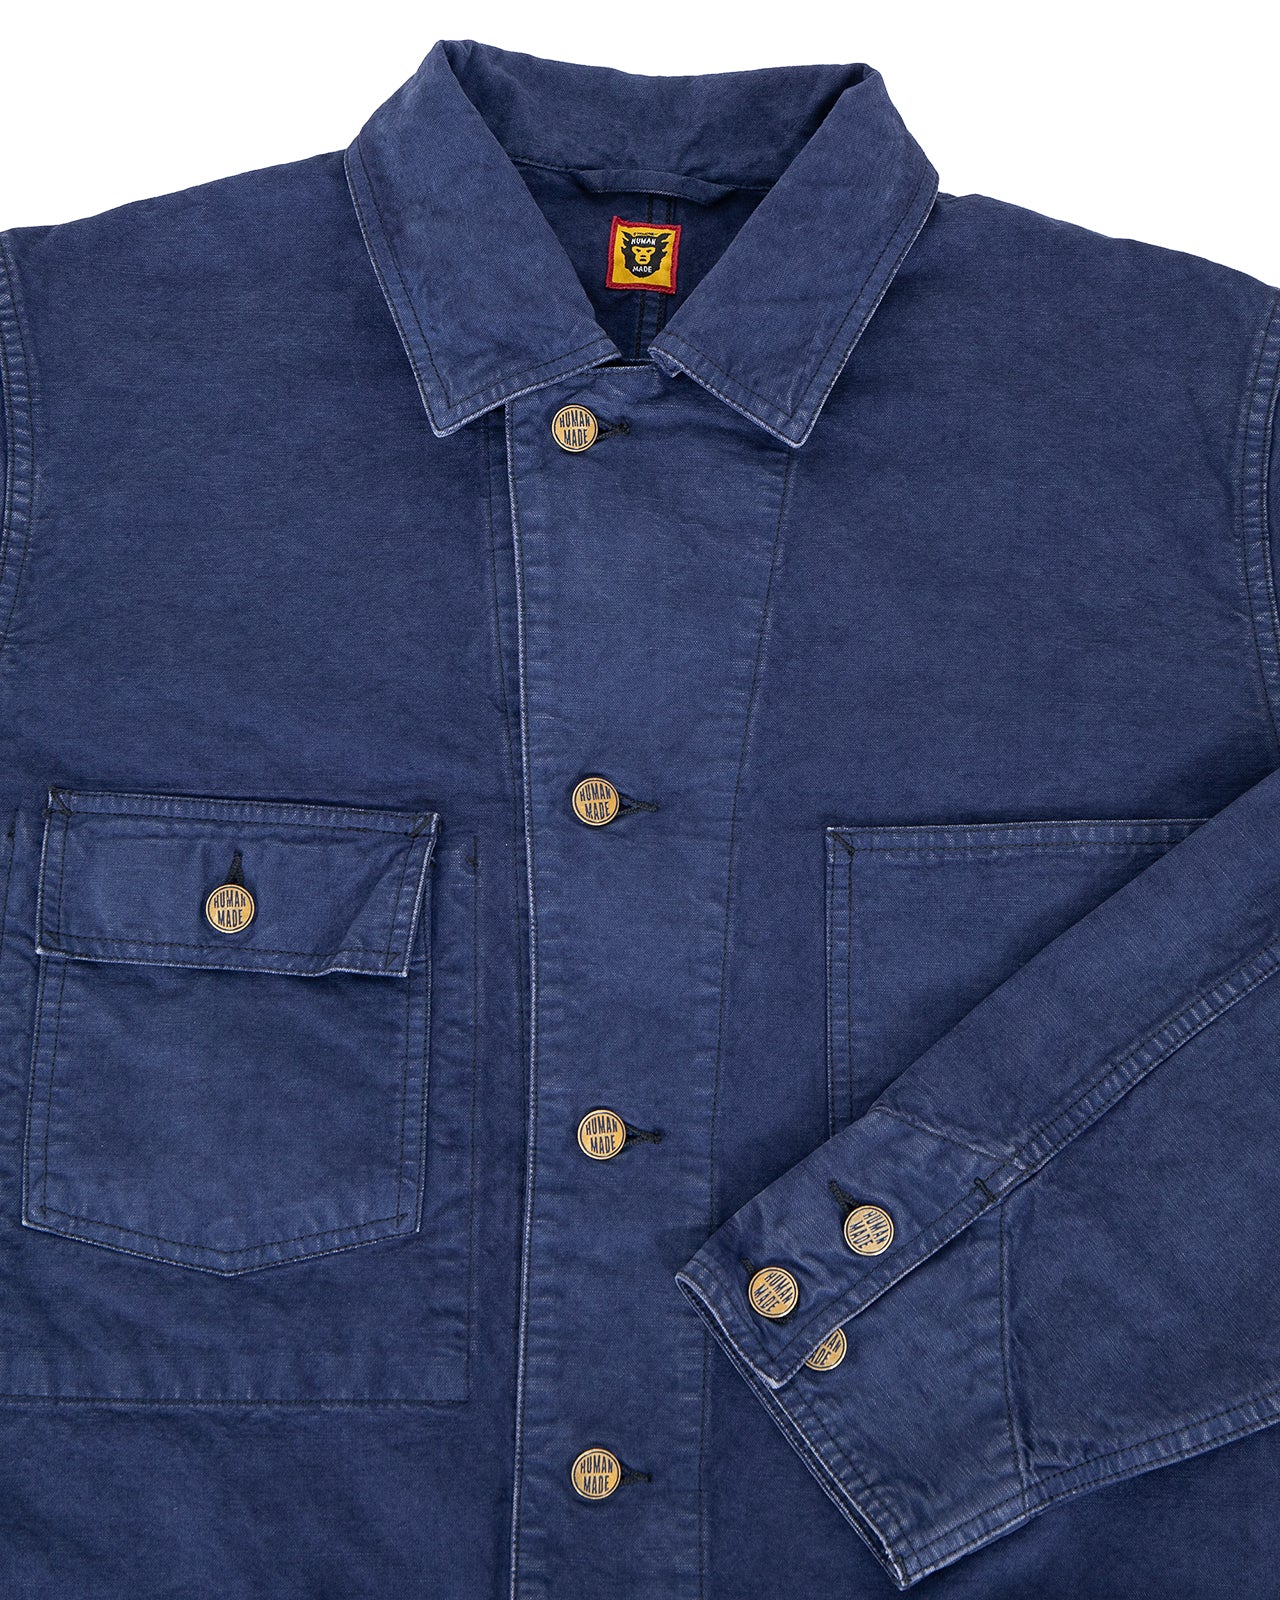 Human Made Garment Dyed Coverall Jacket, Navy